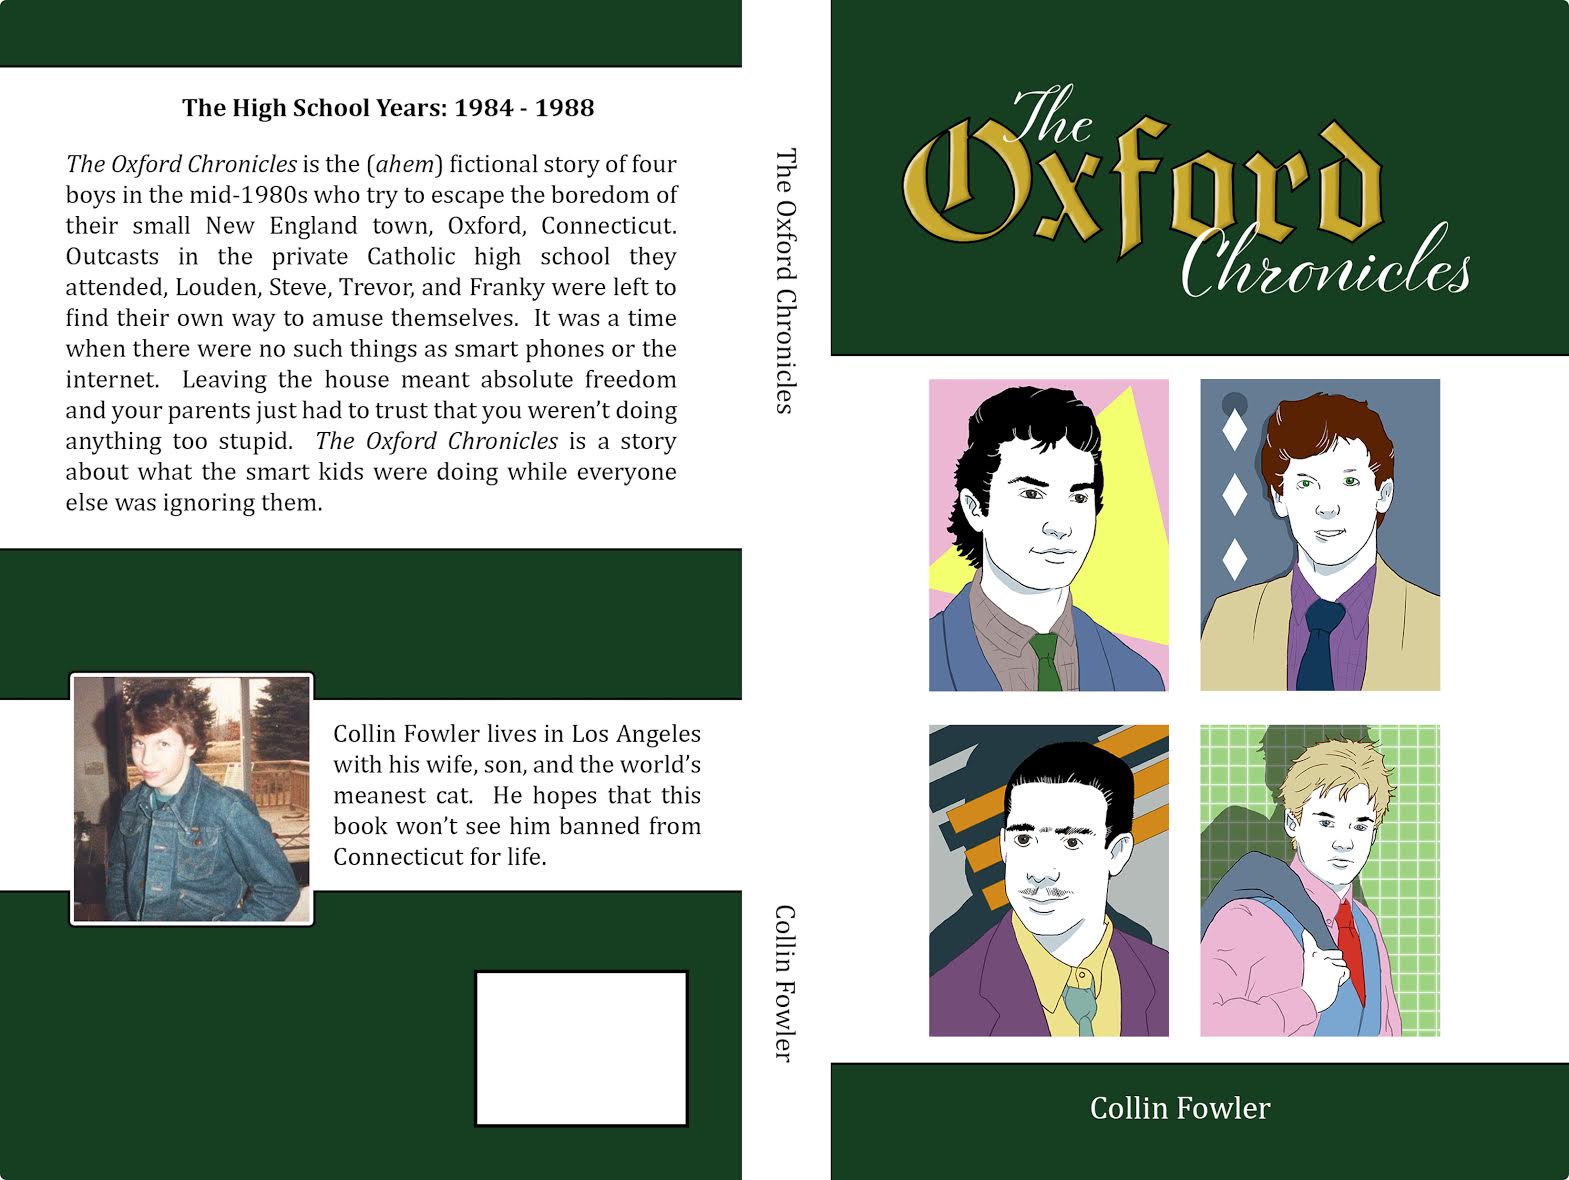 The Oxford Chronicles